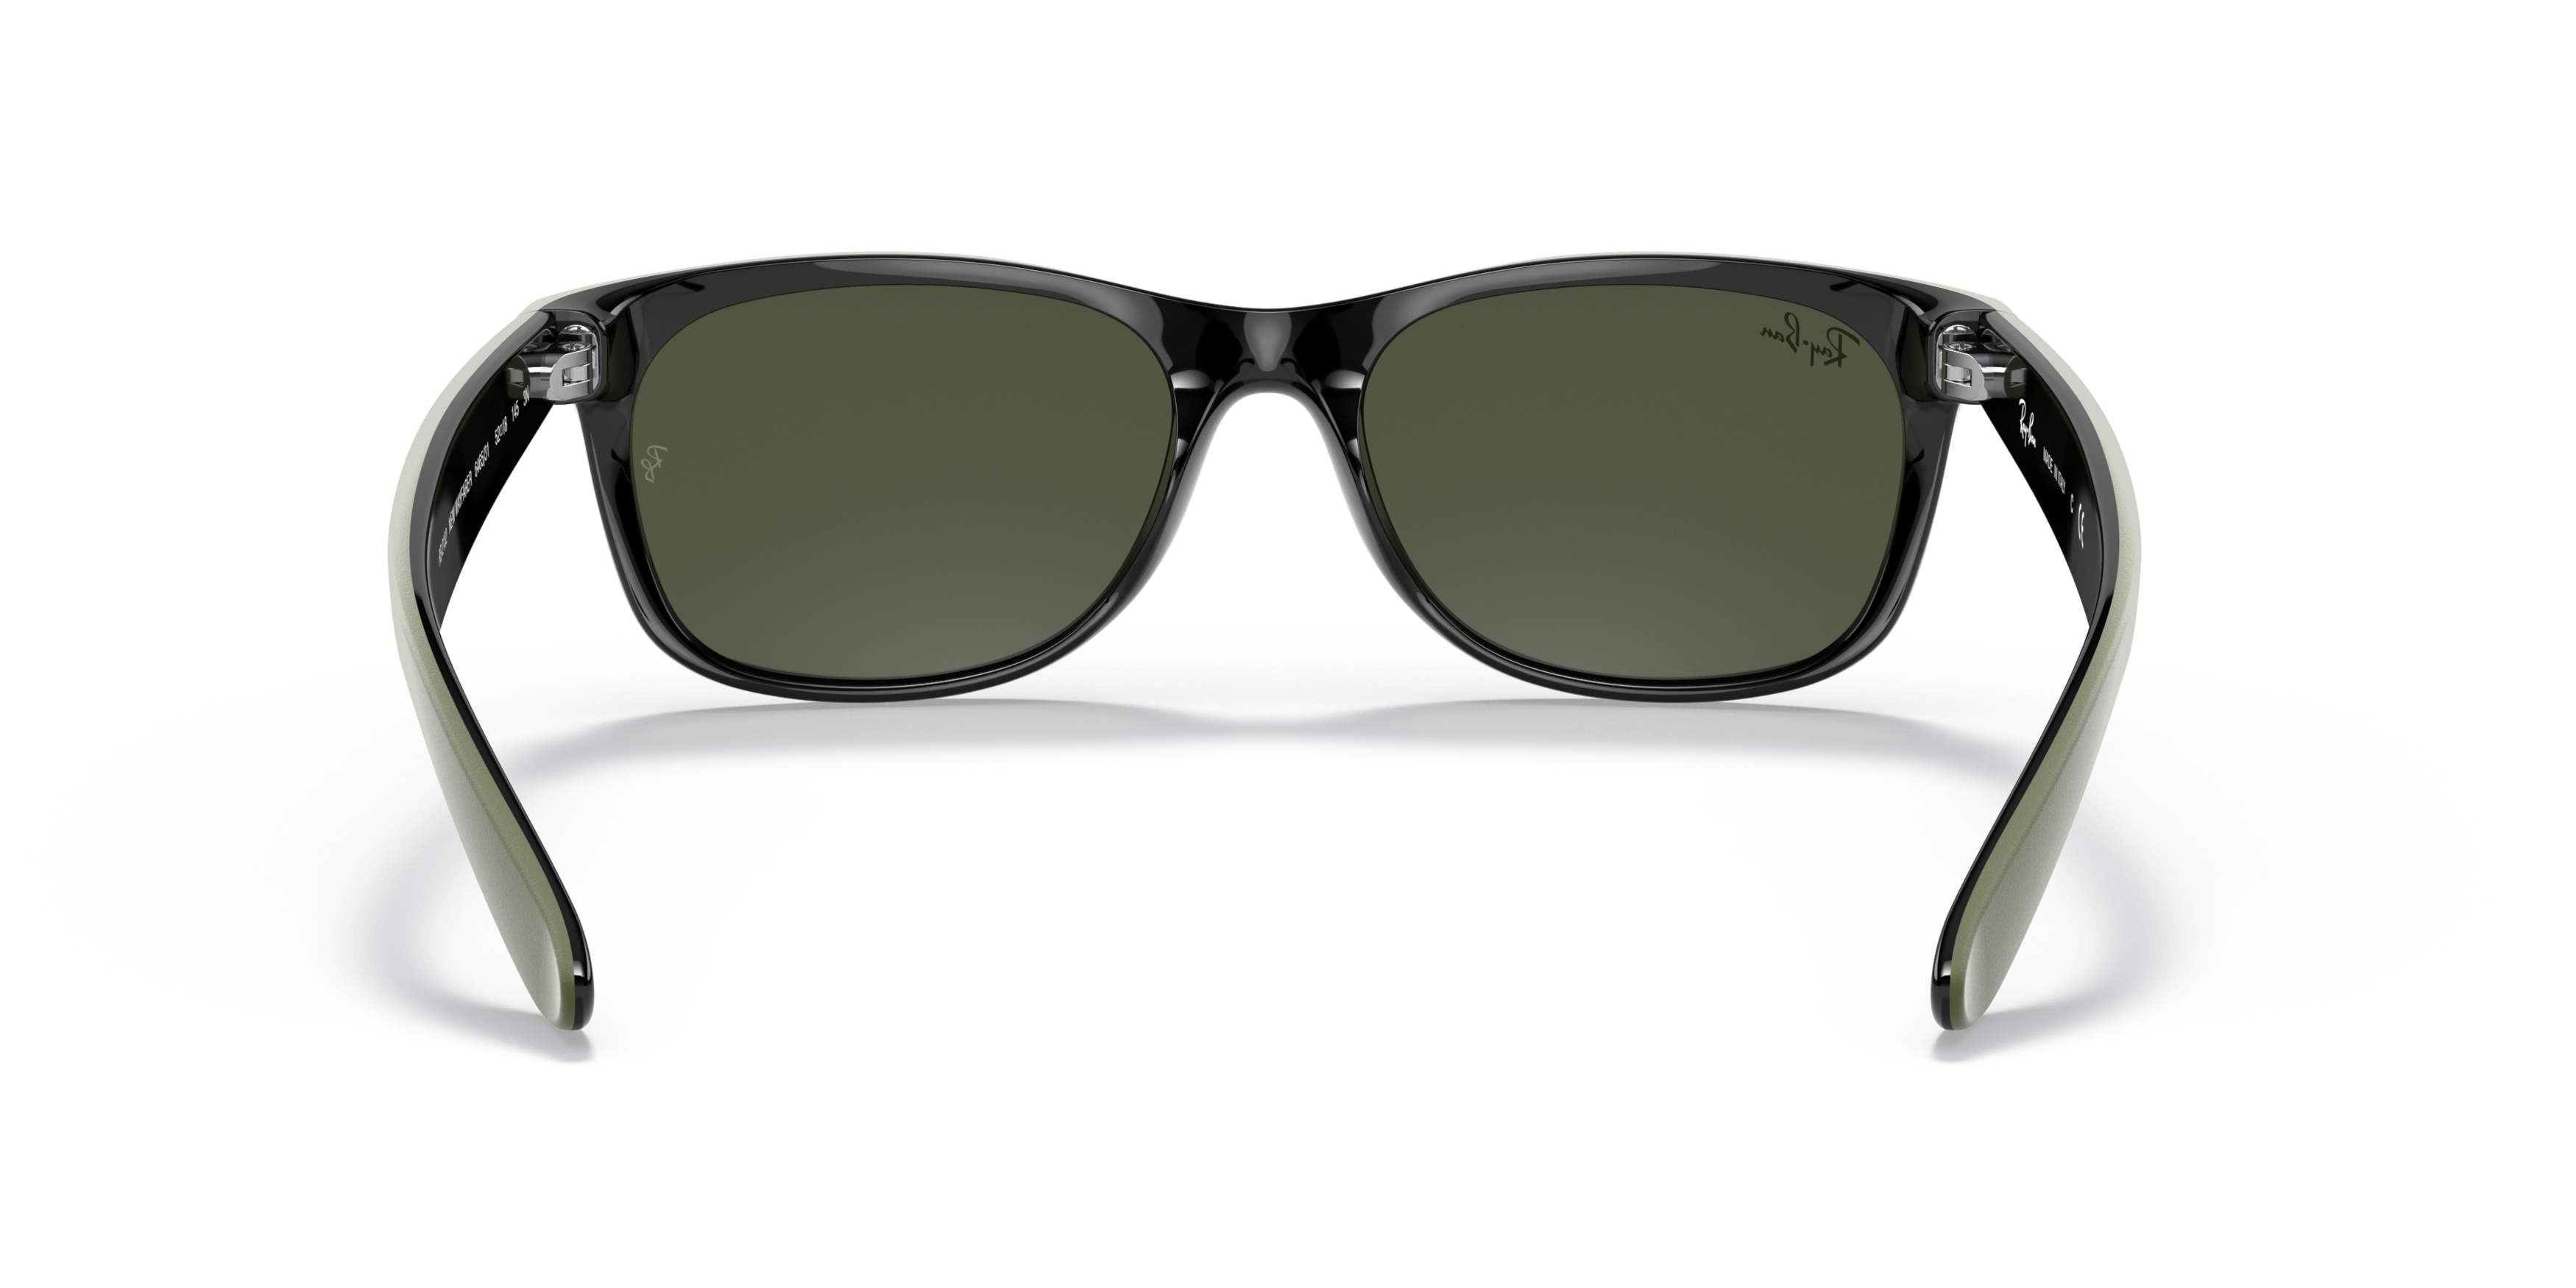 [products.image.detail02] Ray-Ban New Wayfarer RB2132 646531